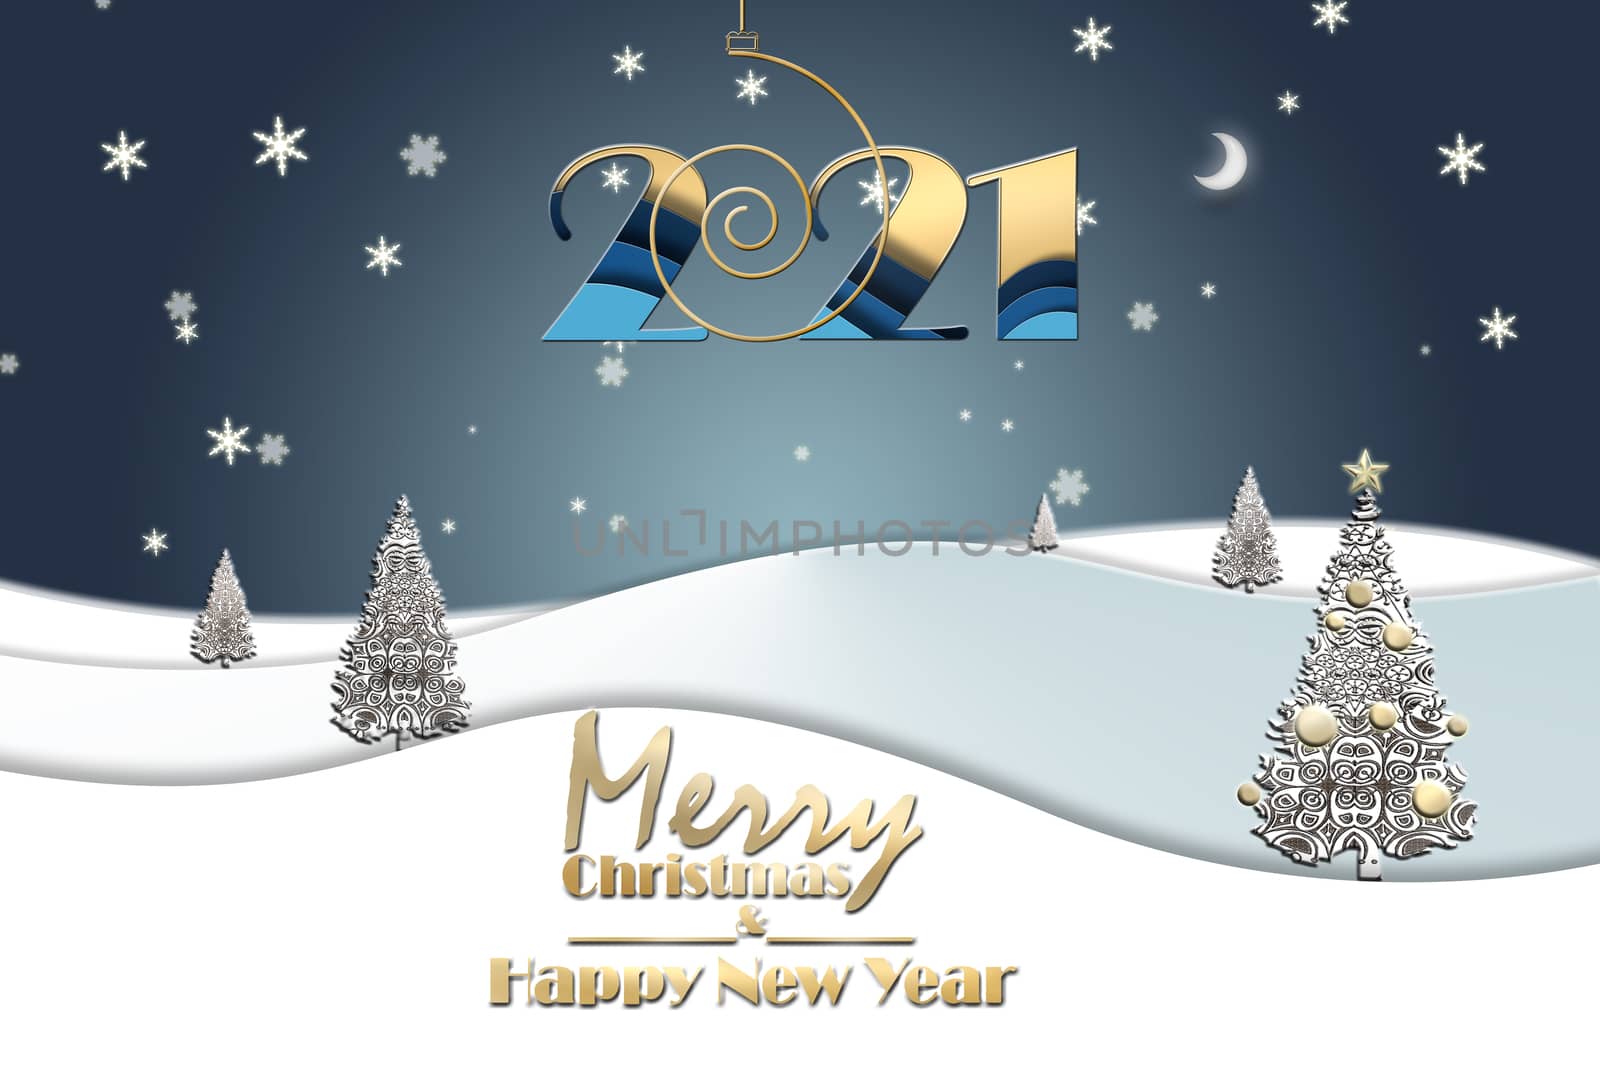 2021 New Year elegant greeting landscape with shining gold christmas trees made of snowflakes on blue background and hanging gold digit 2021, text Merry Christmas Happy New Year. 3D Illustration.